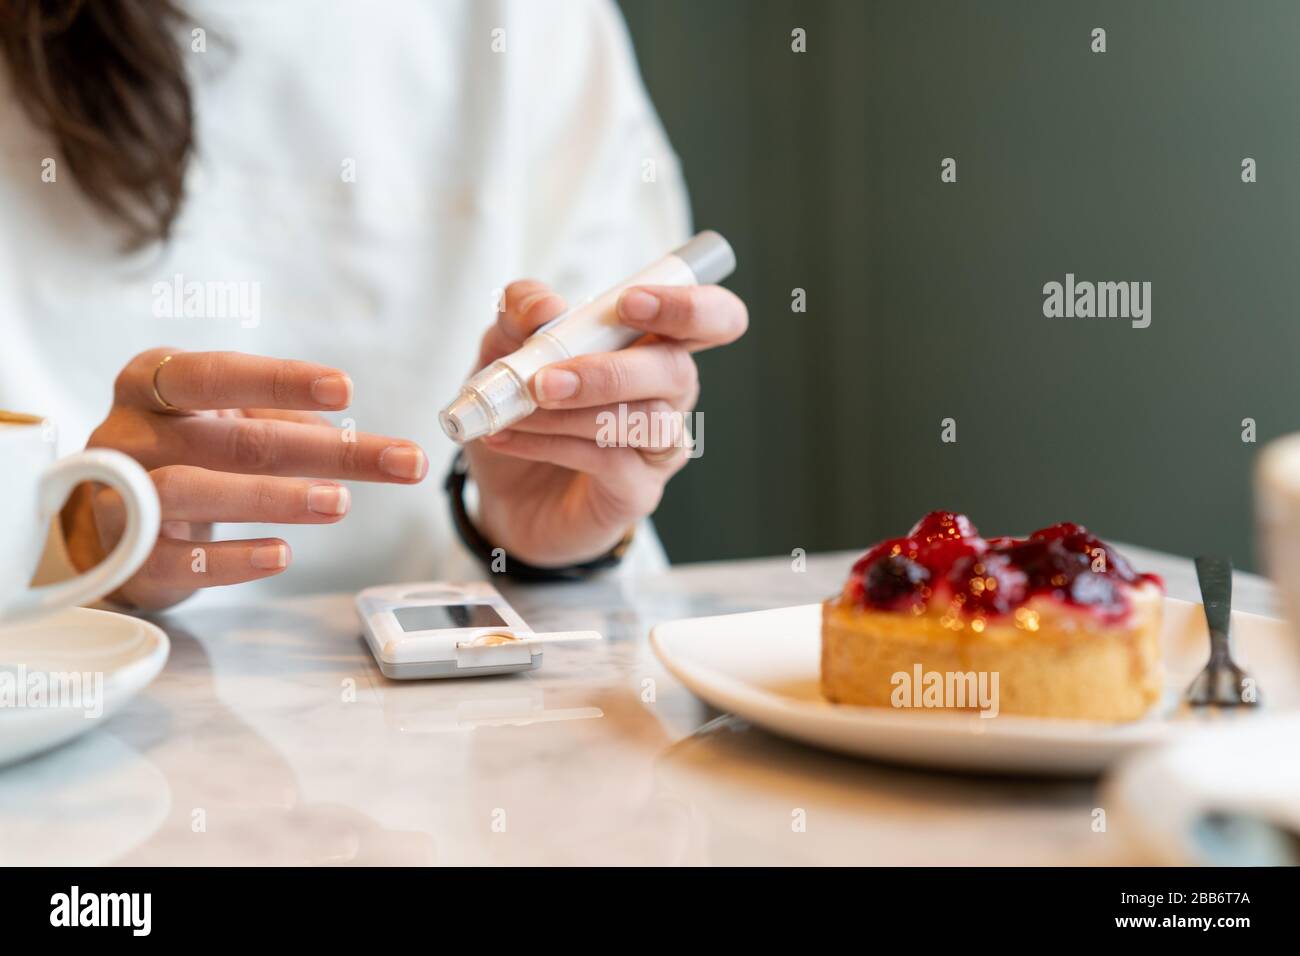 Woman checking her insulin levels before eating a cake Stock Photo